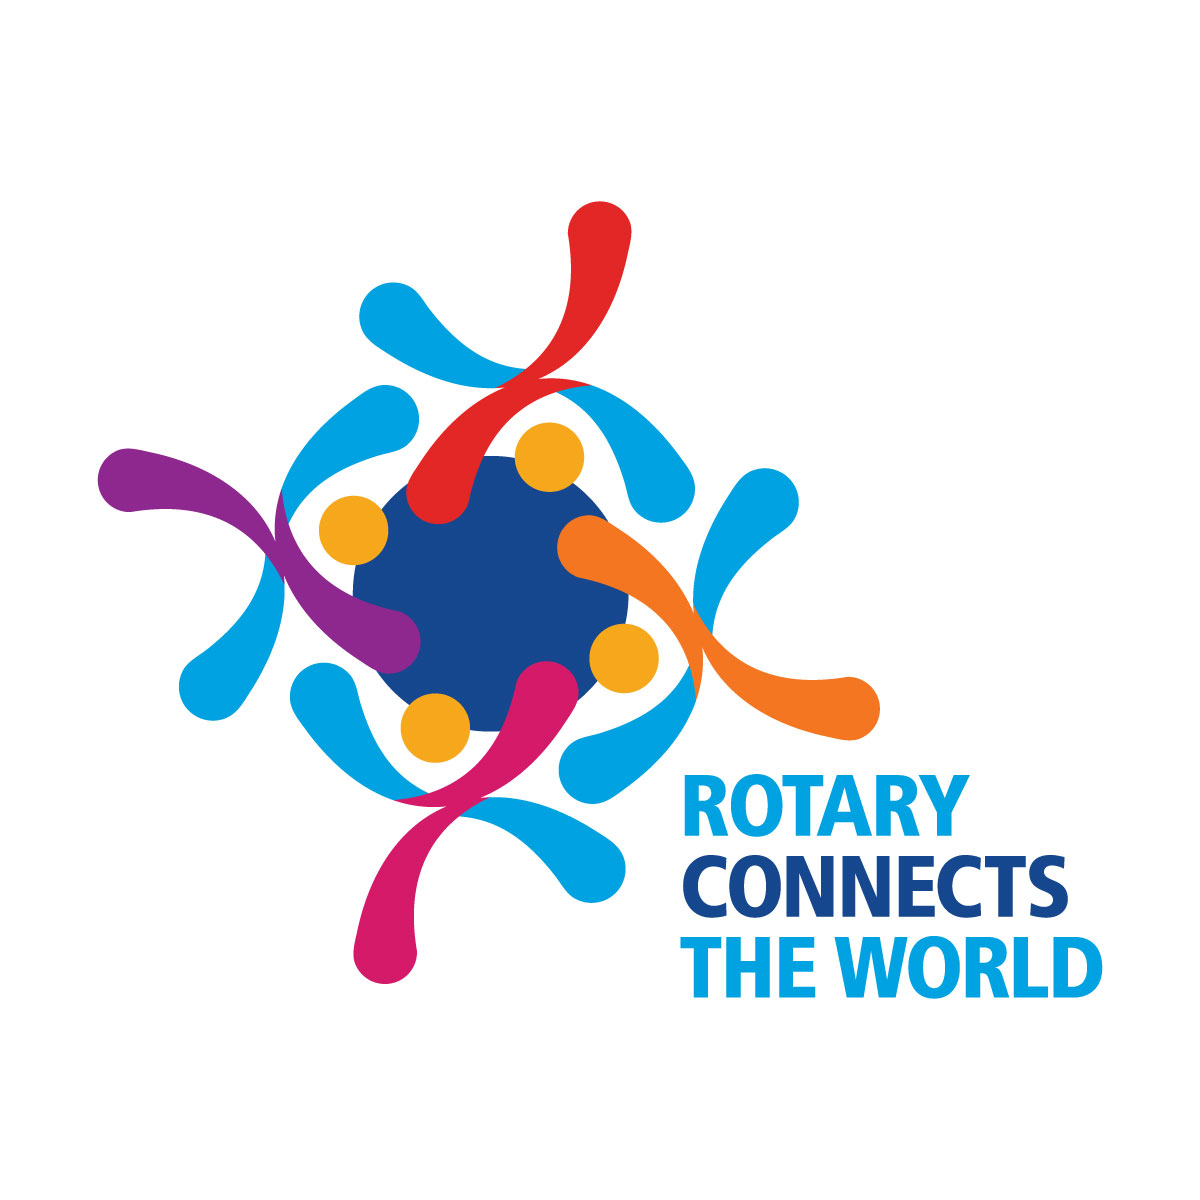 Rotary Connects the World